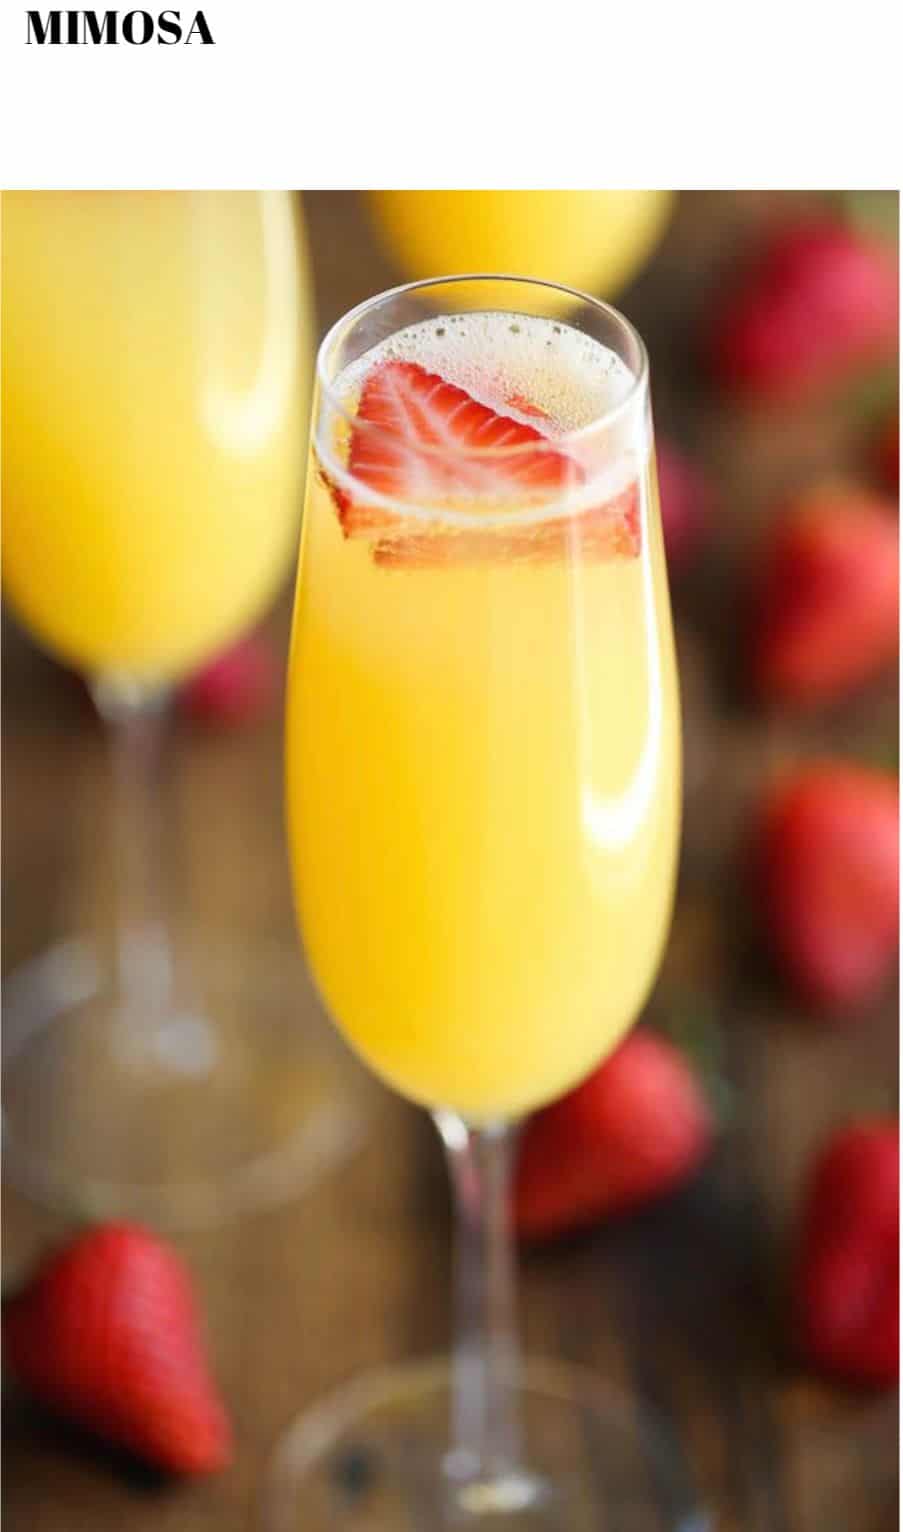 A glass of orange juice with strawberries in it.